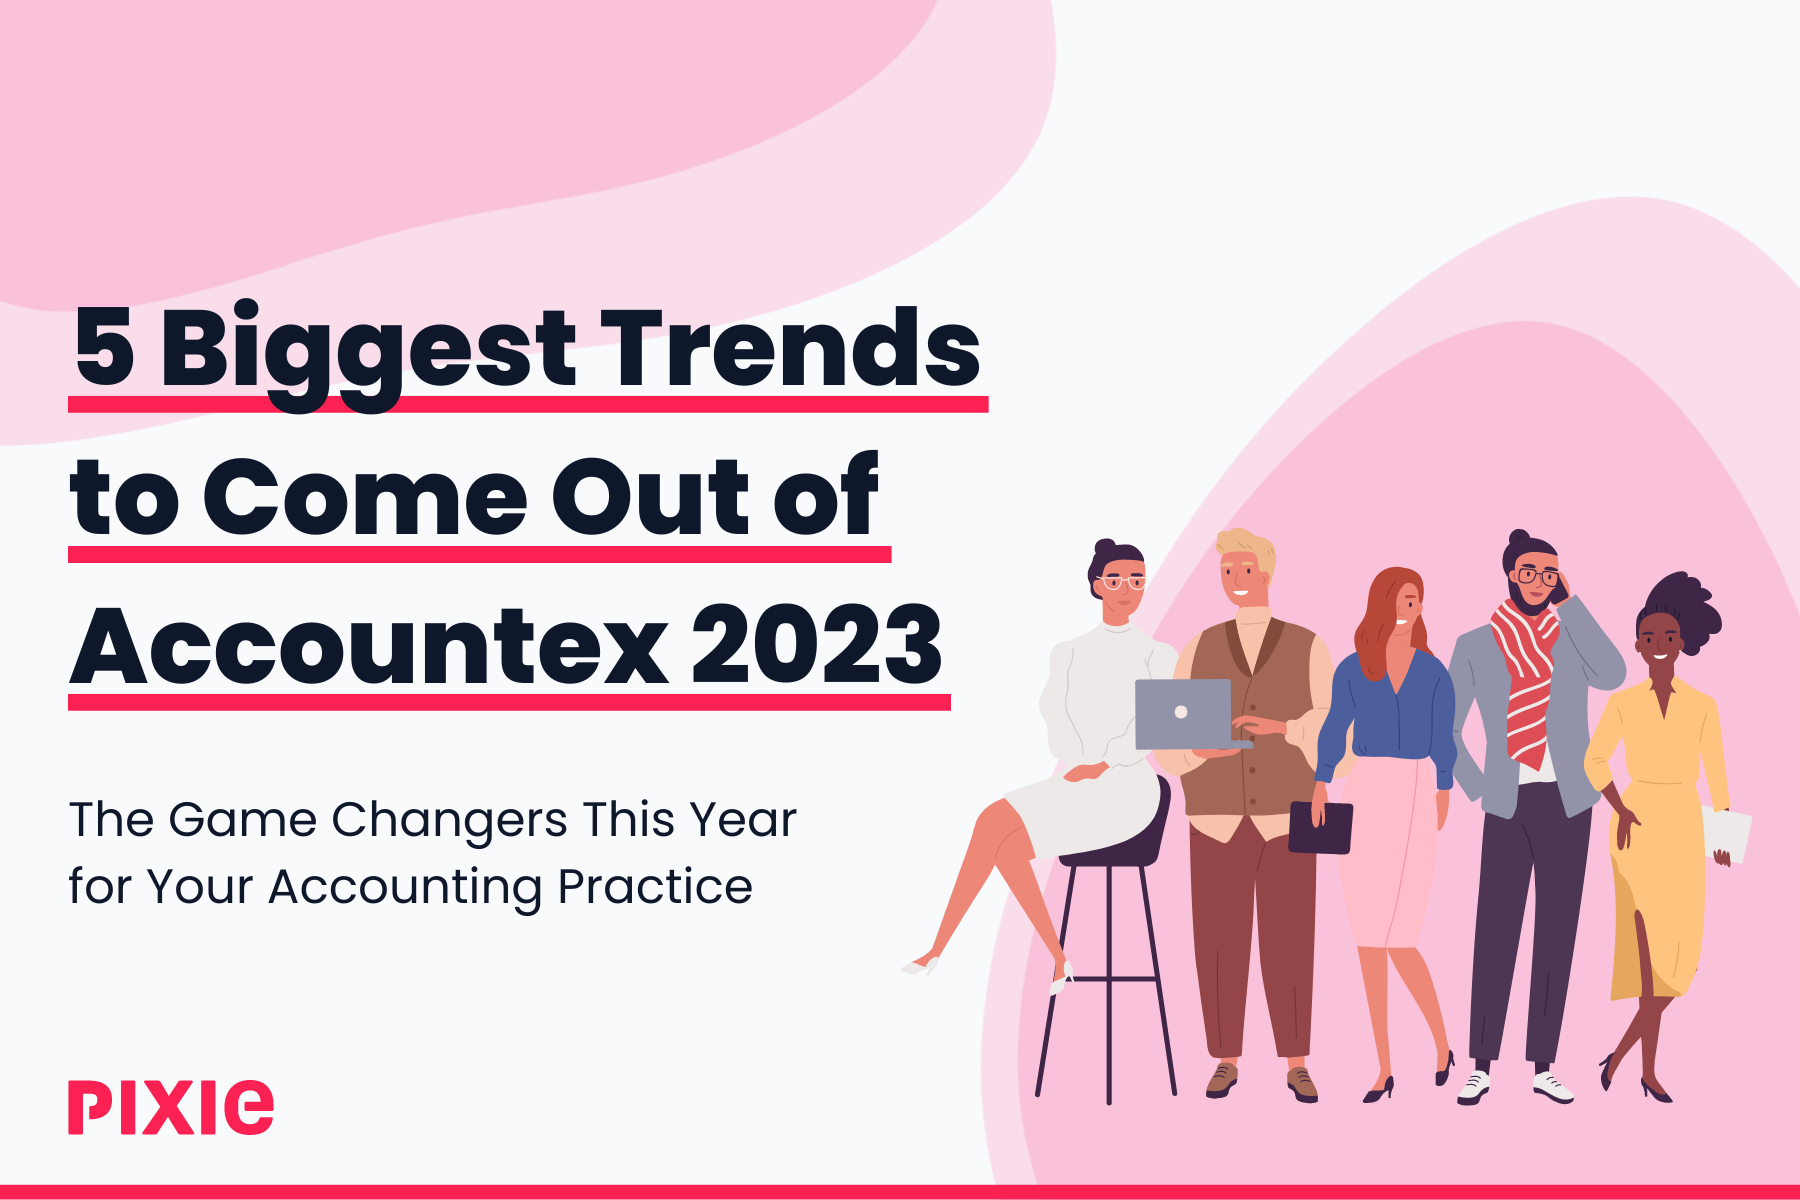 5 Biggest Trends to Come Out of Accountex 2023: The Game Changers This Year for Your Accounting Practice